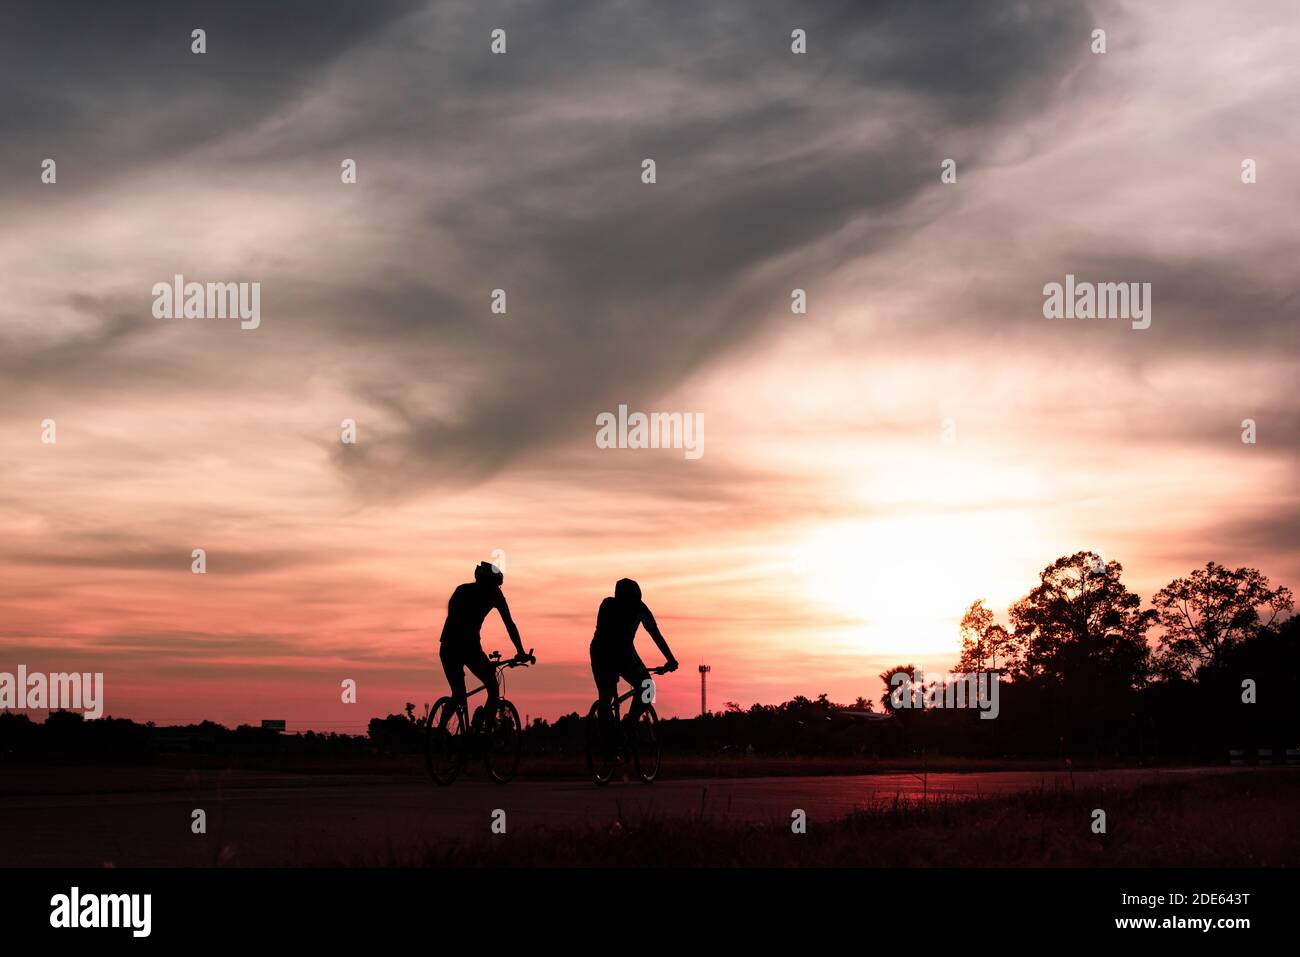 The couple of cyclist riding the road bike at sunset,silhouette image. Stock Photo